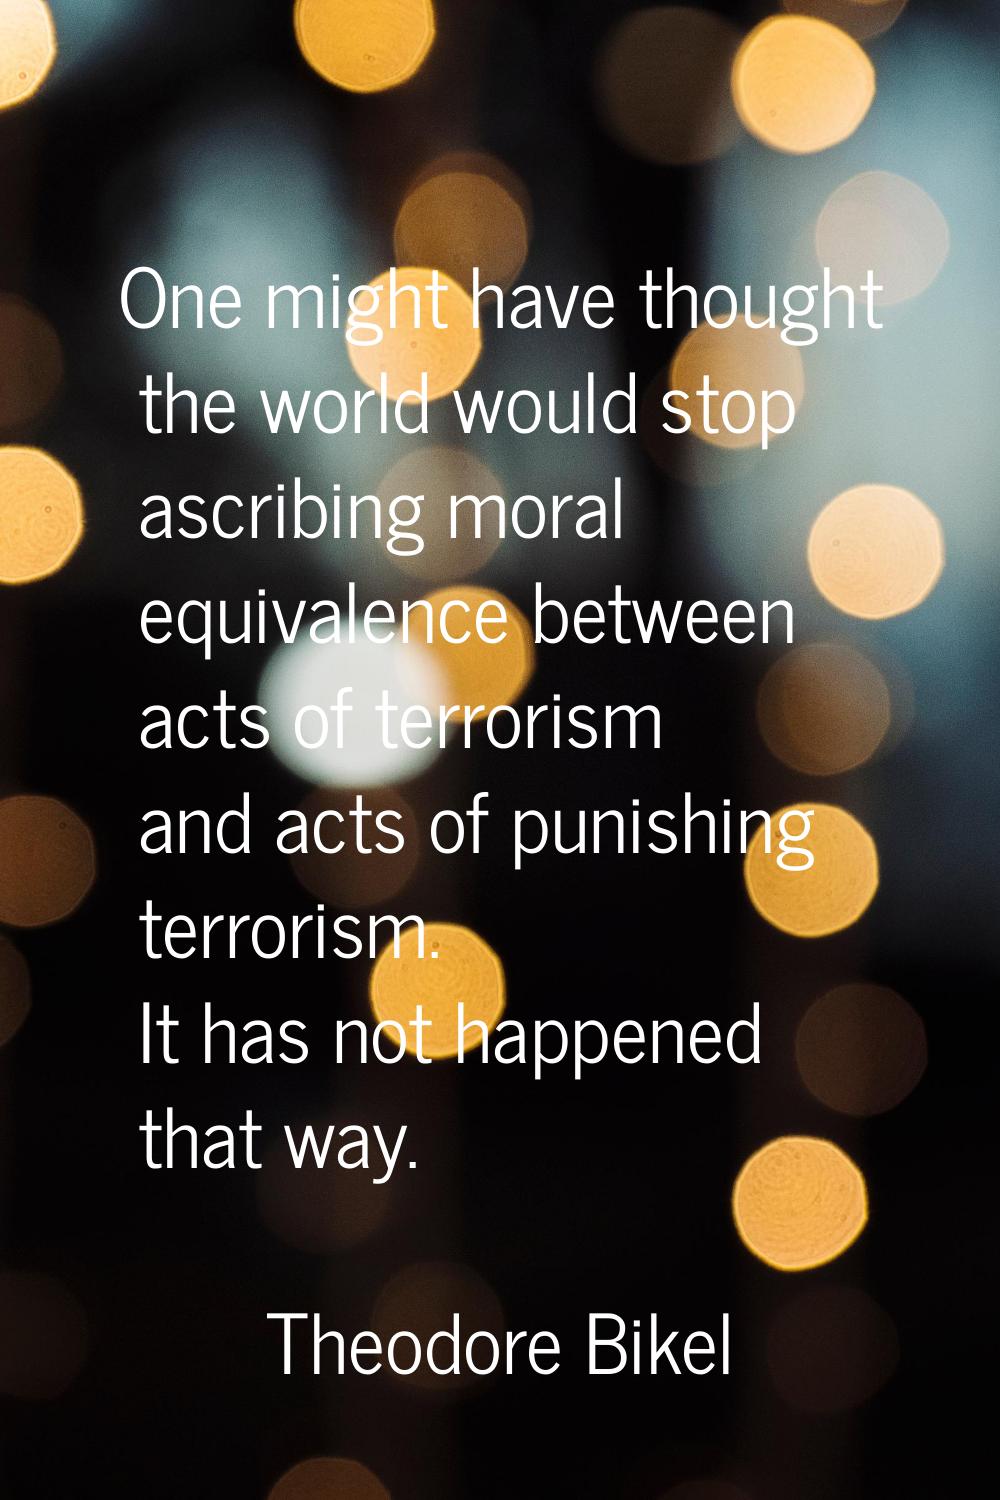 One might have thought the world would stop ascribing moral equivalence between acts of terrorism a